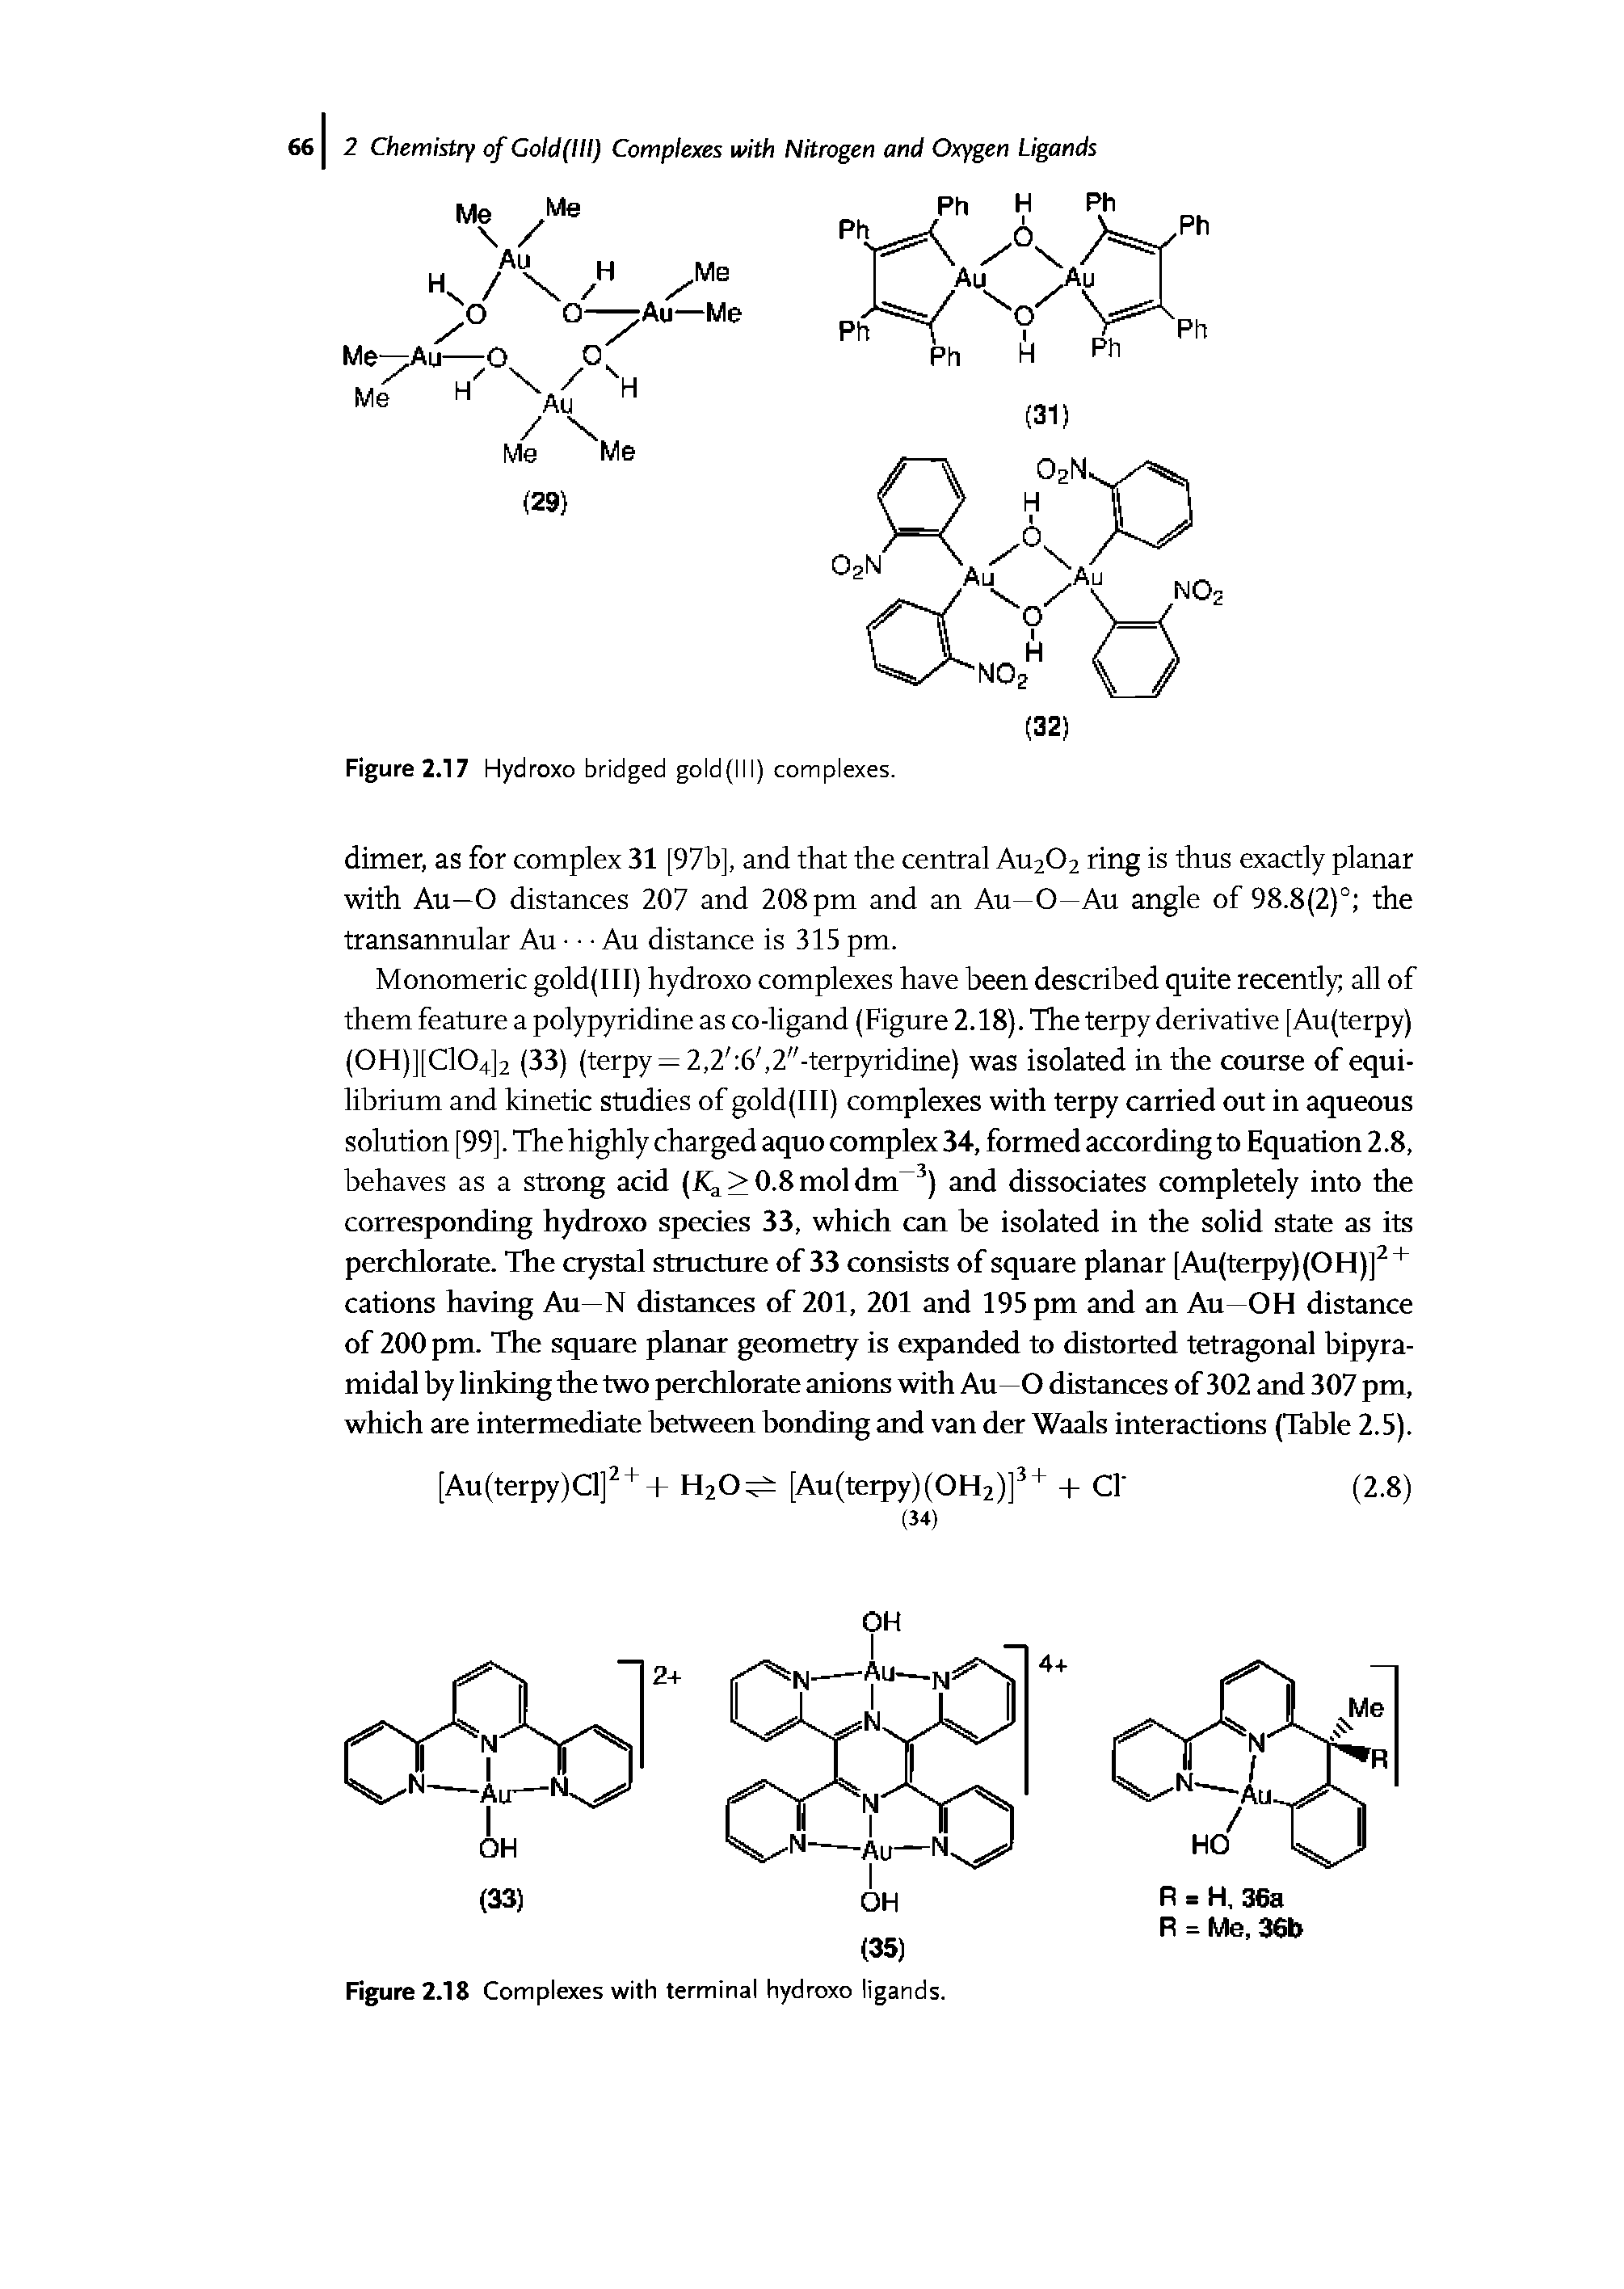 Figure 2.18 Complexes with terminal hydroxo ligands.